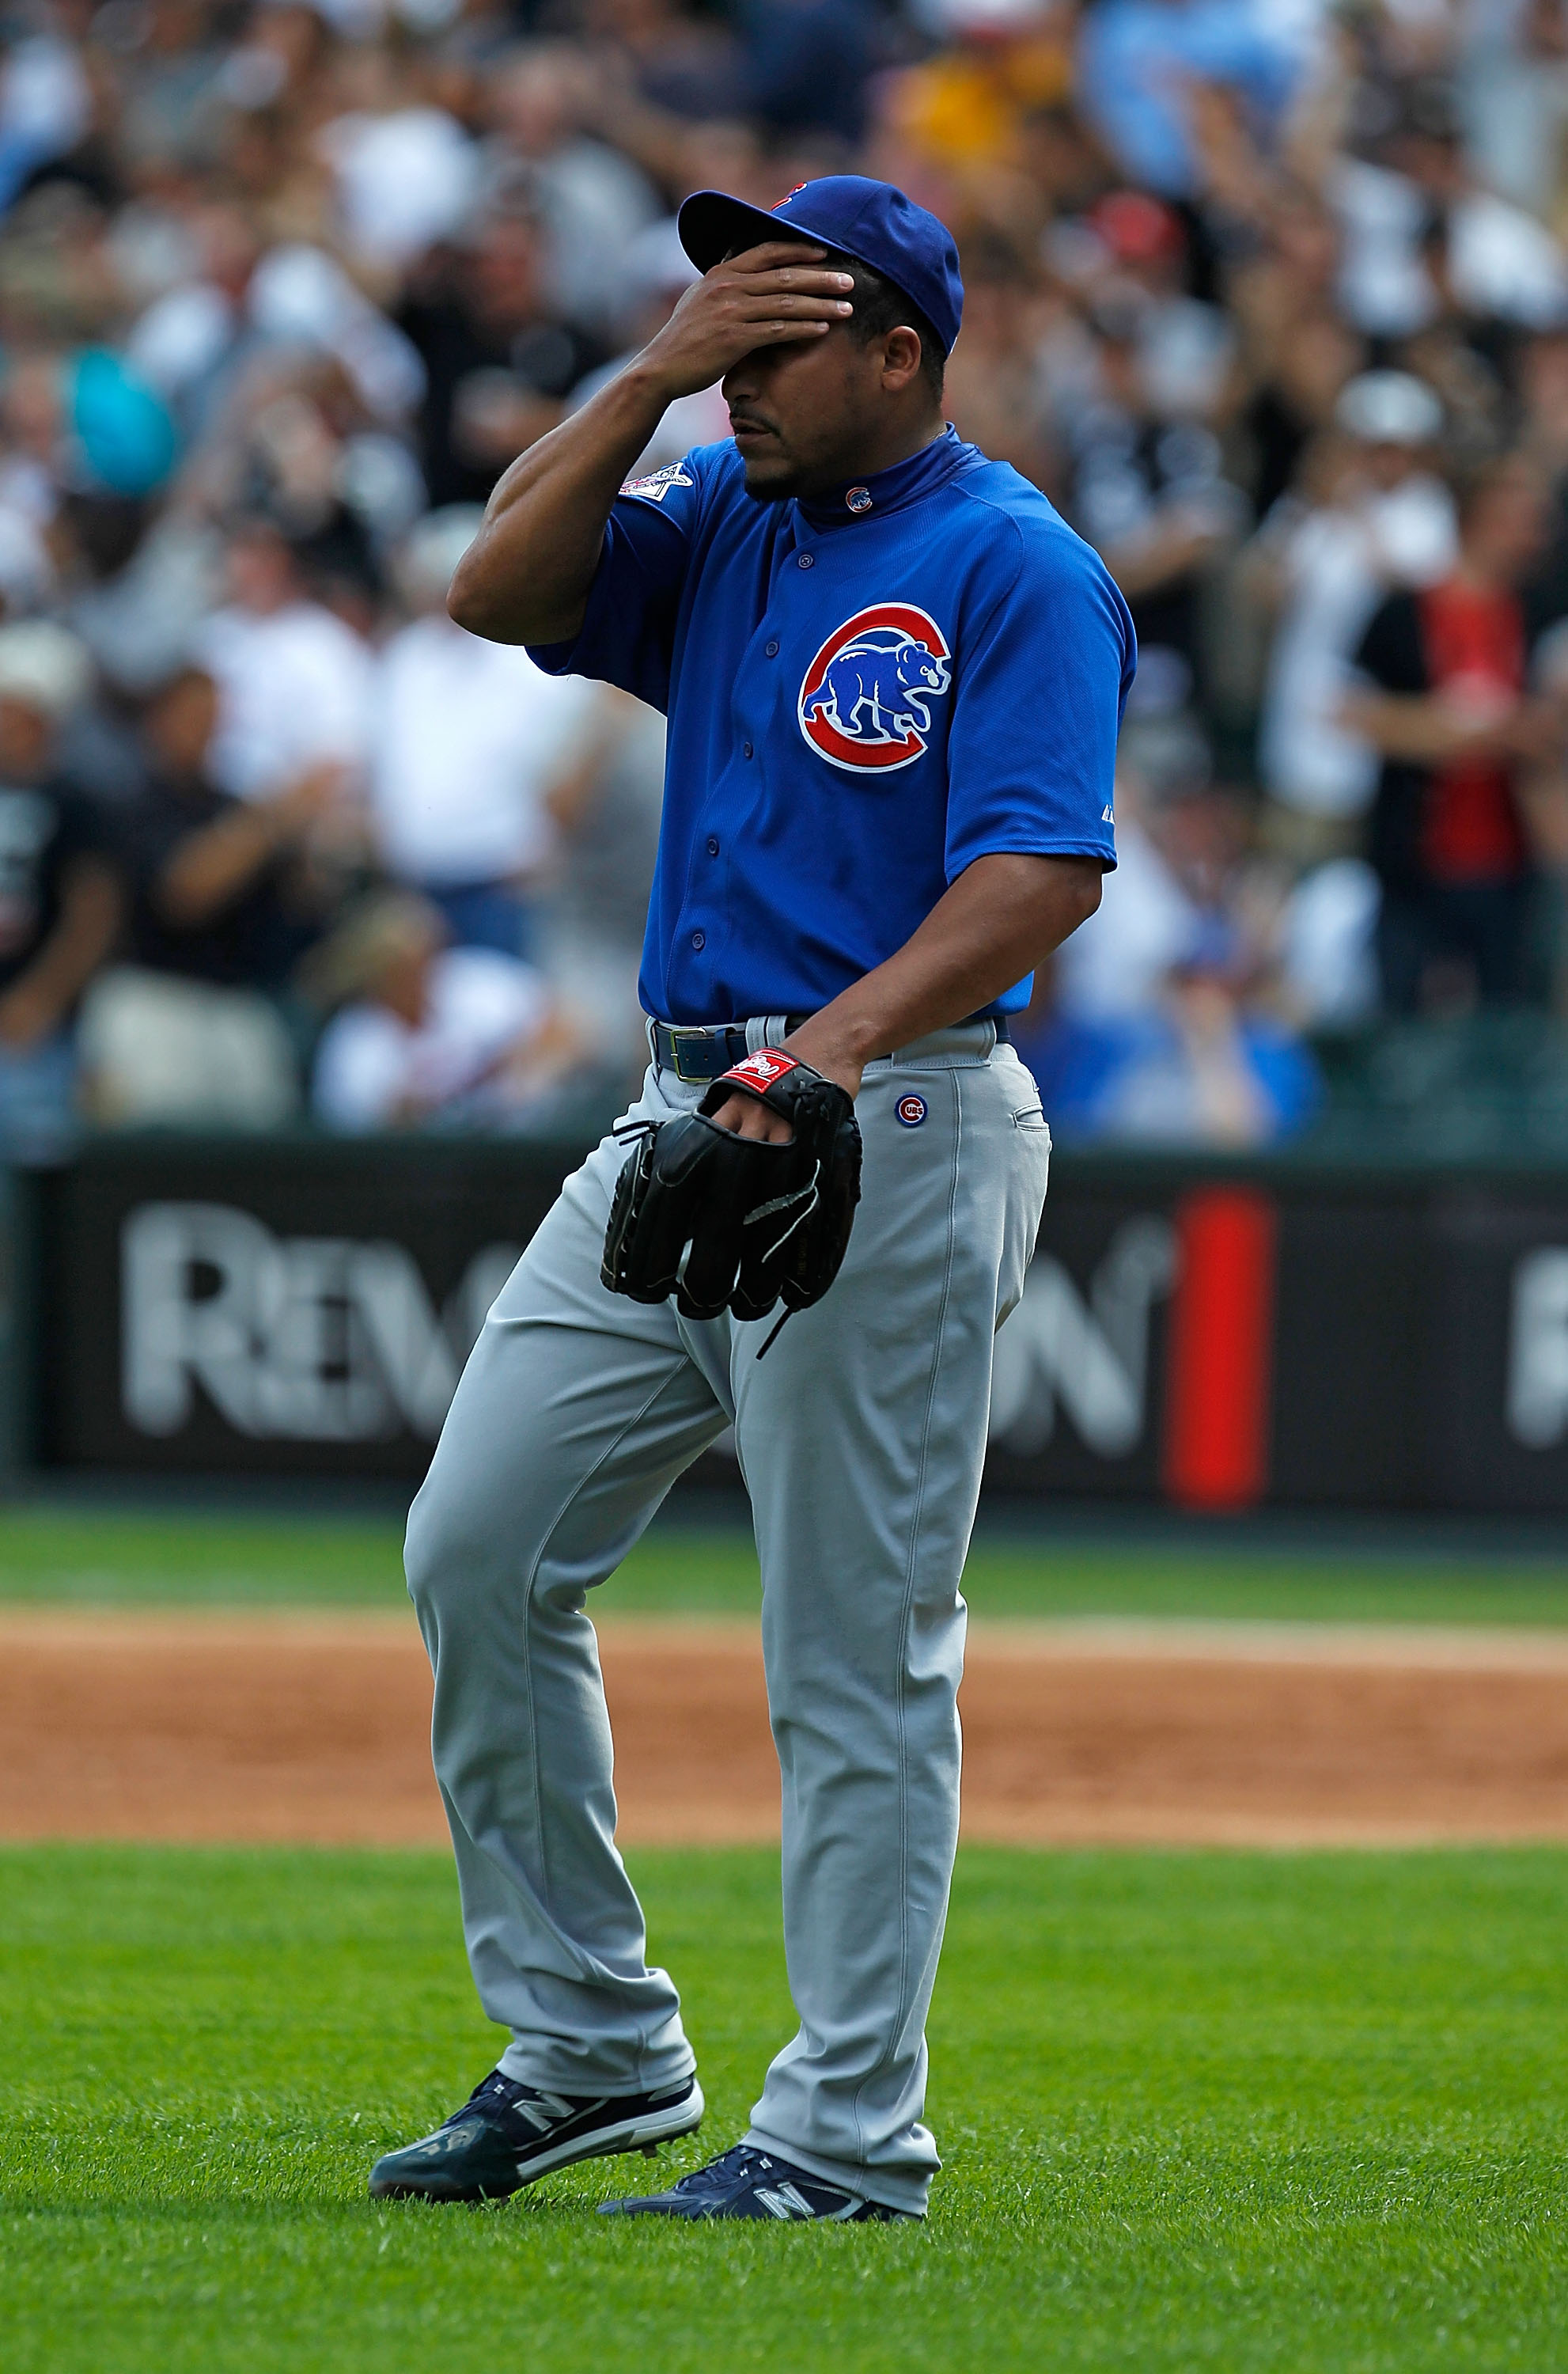 CHICAGO - JUNE 25: Starting pitcher Carlos Zambrano #38 of the Chicago Cubs reacts after giving up a three-run home run in the 1st inning to Carlos Quentin of the Chicago White Sox at U.S. Cellular Field on June 25, 2010 in Chicago, Illinois.  Zambrano wa